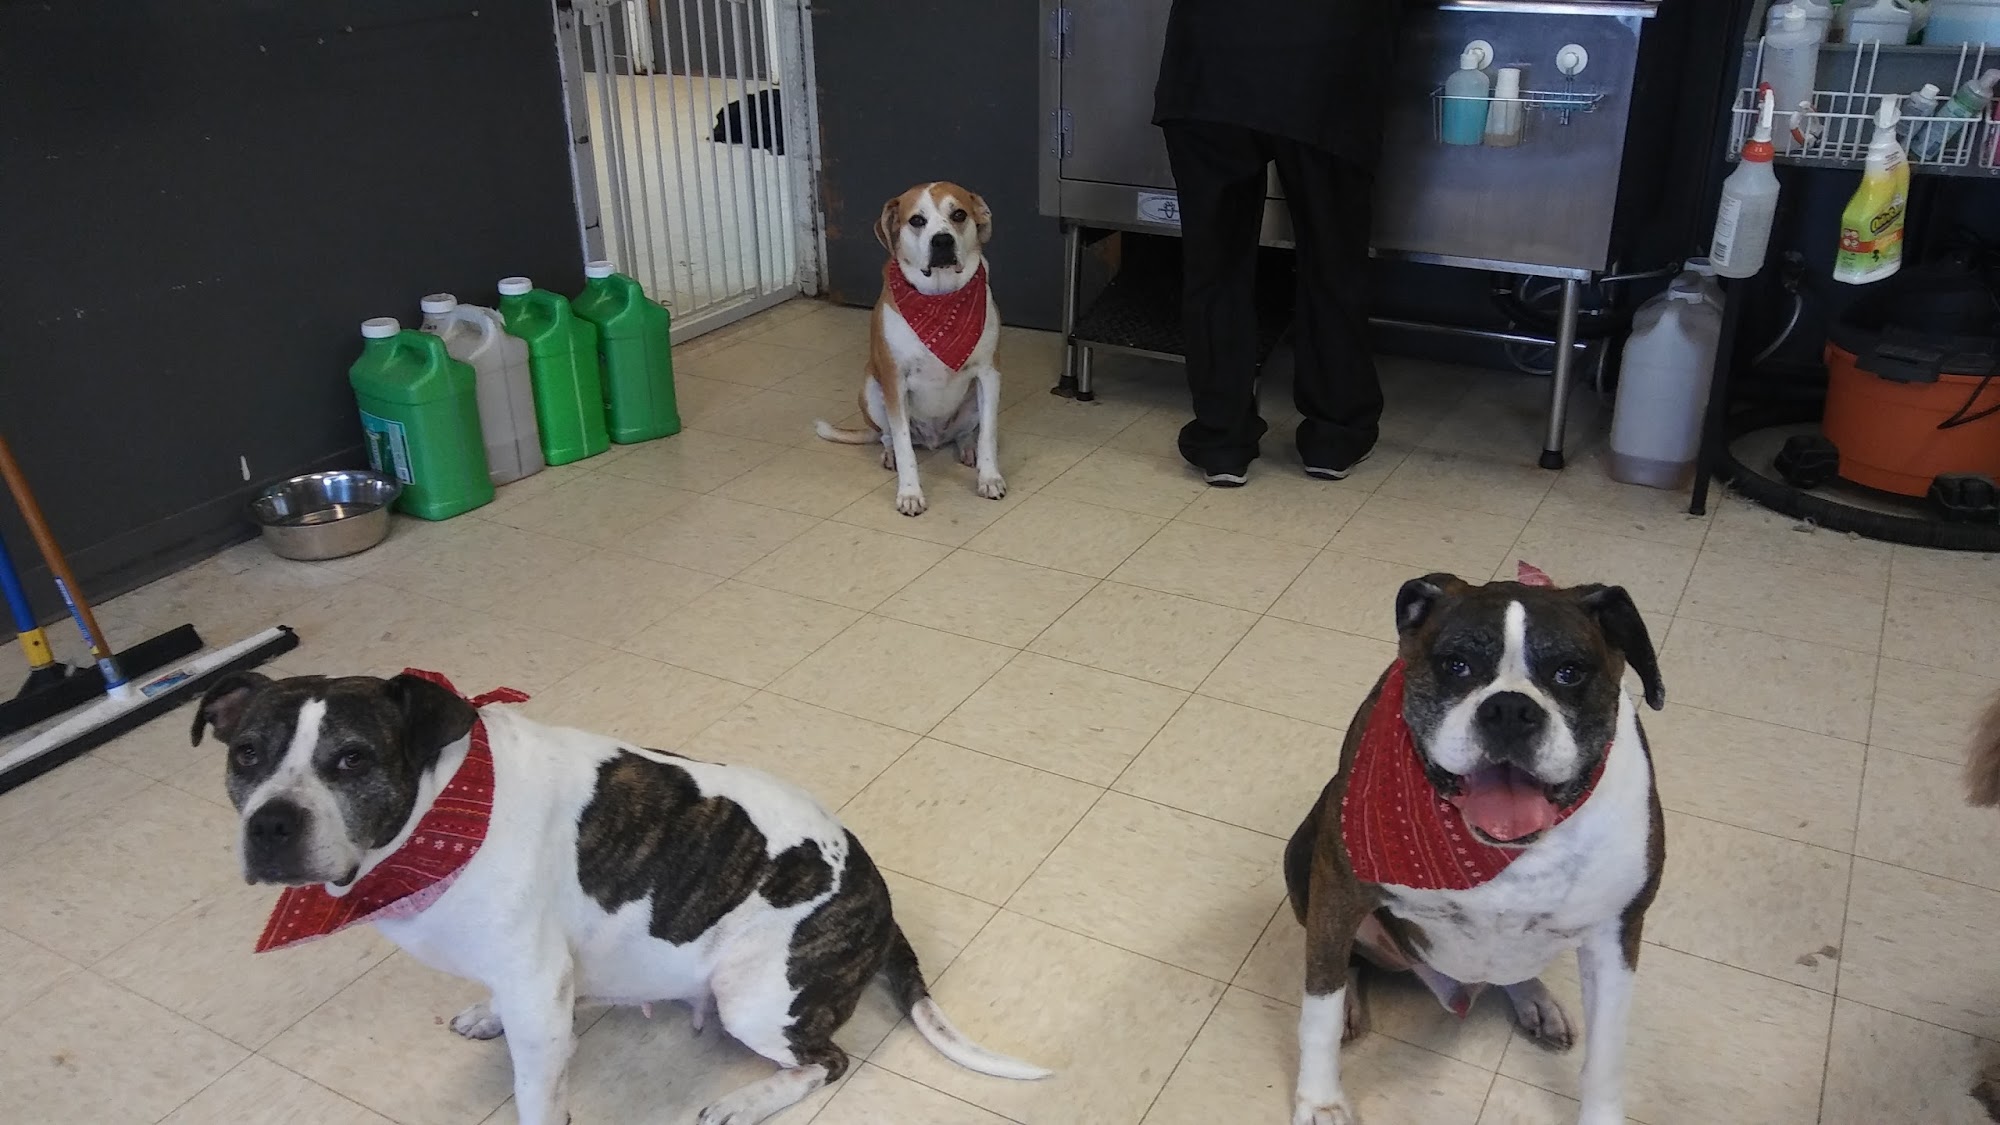 The Canine Center